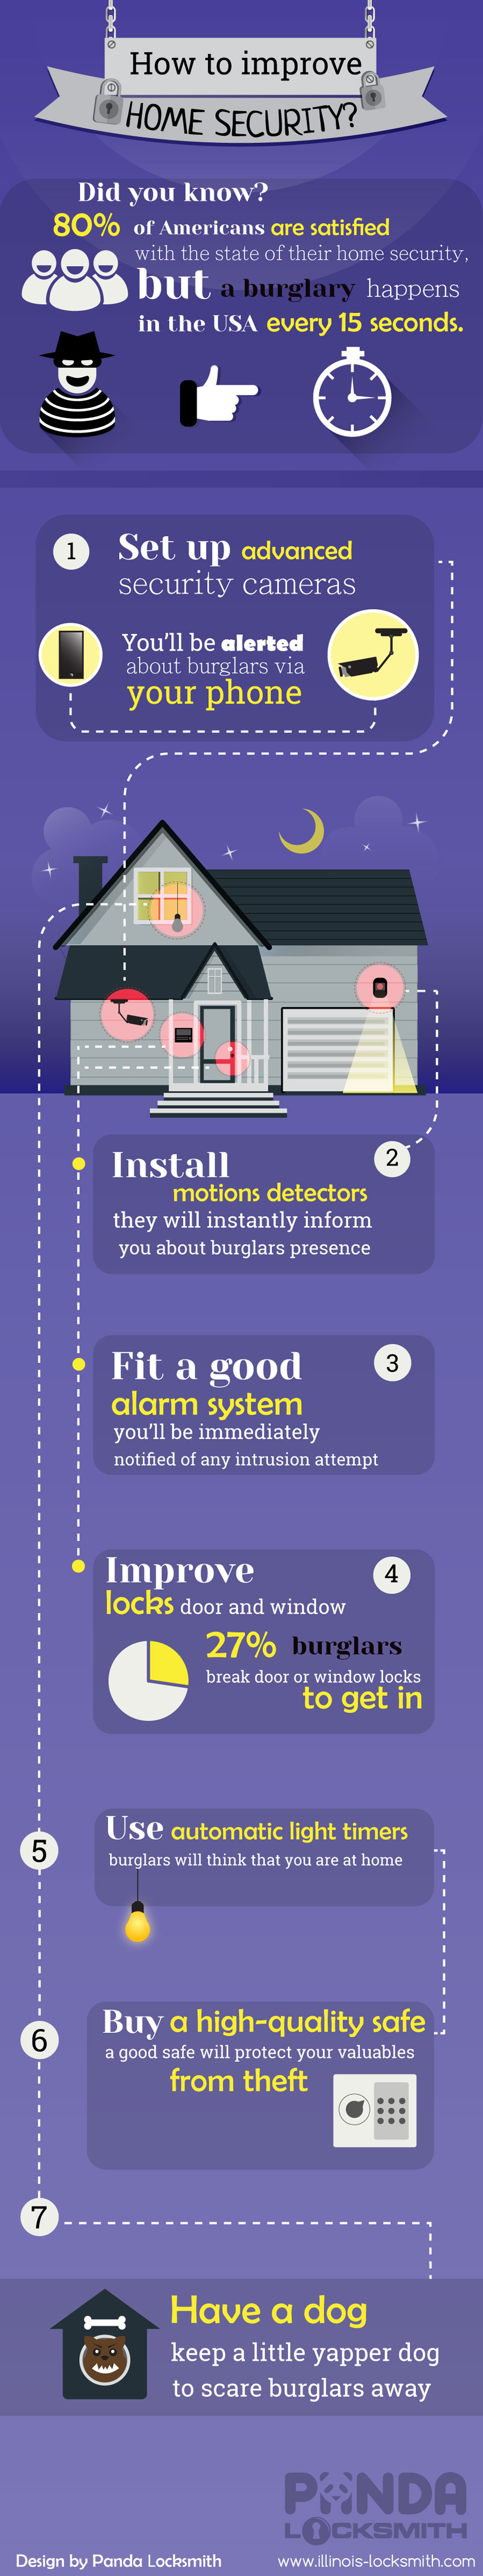 how to improve home security Infographic